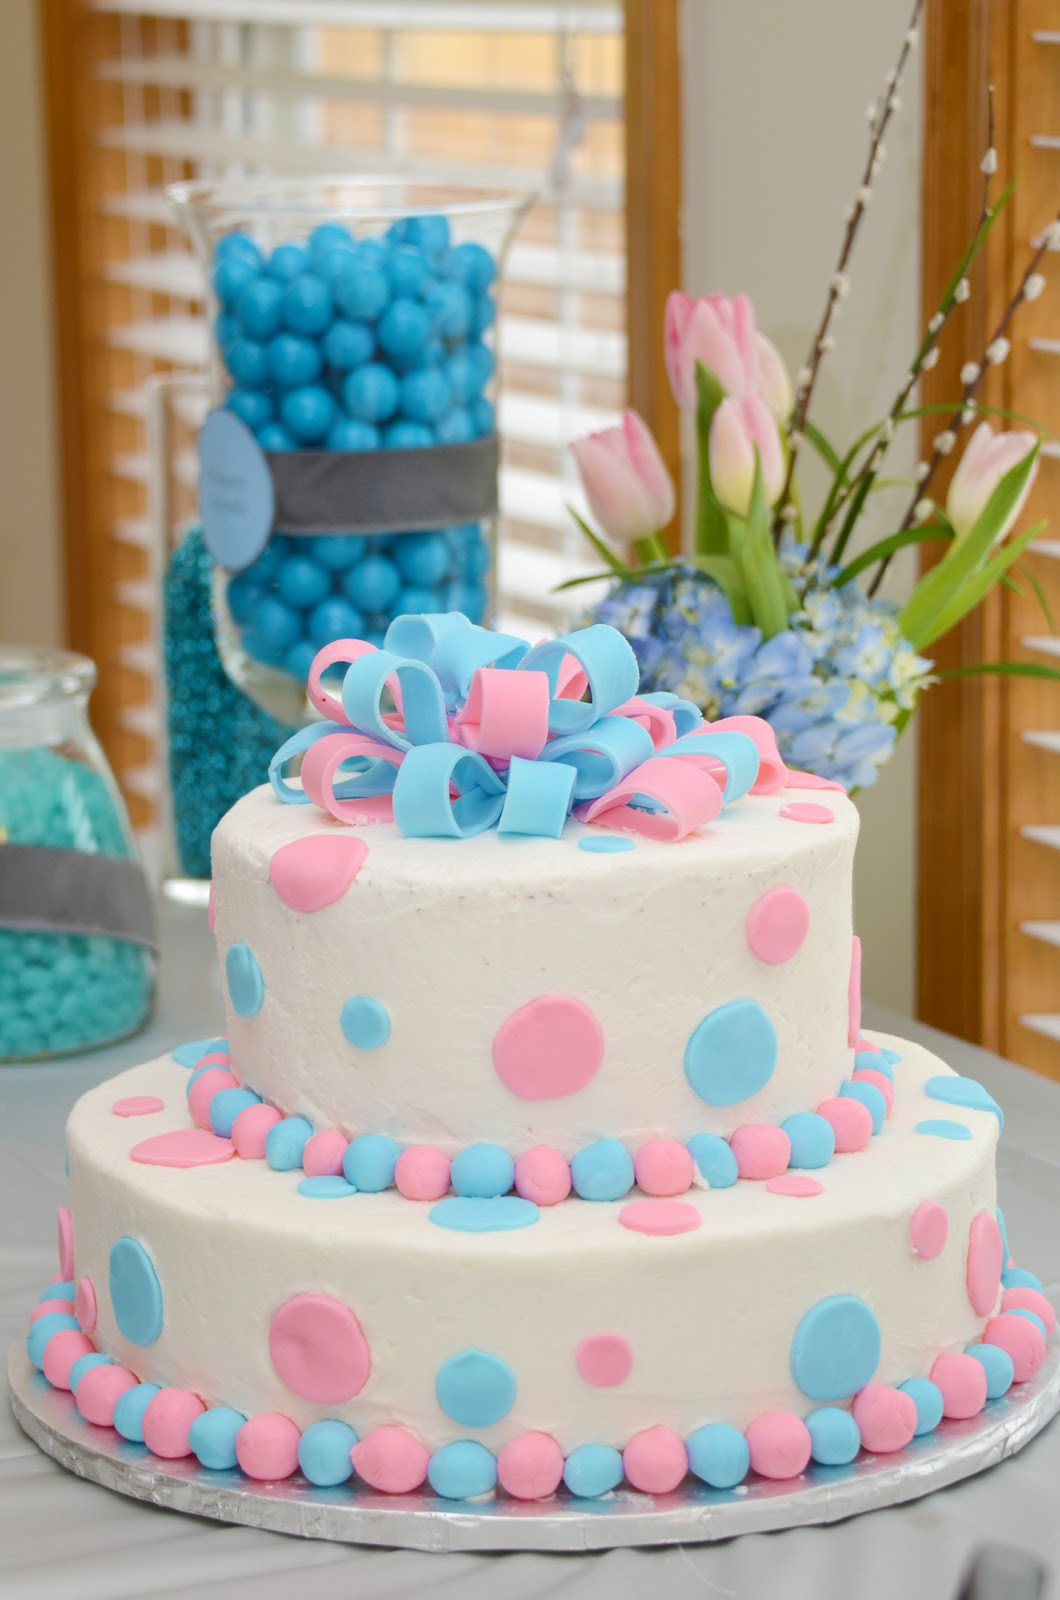 Gender Reveal Party Cake Ideas
 Vernon Volumes Baby Goble s Gender Reveal Party